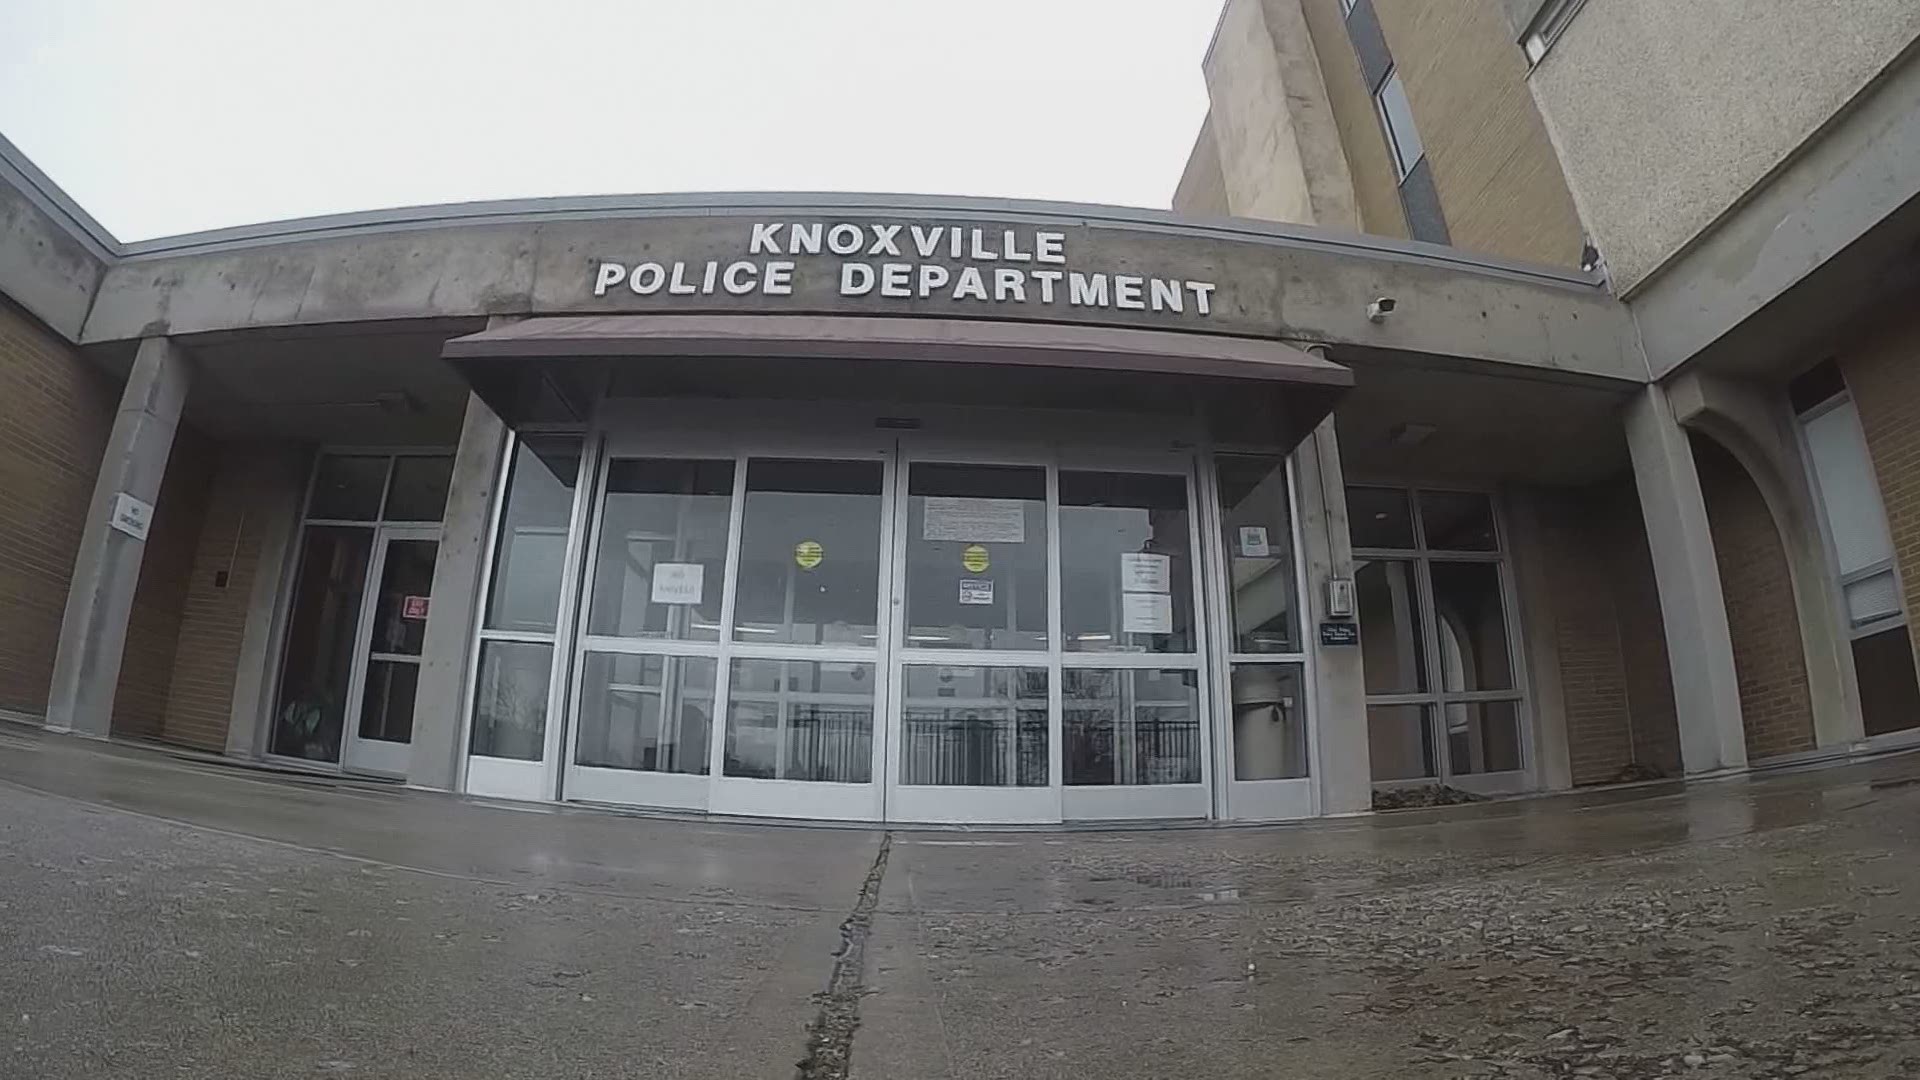 Here in Knoxville, both Mayor Indya Kincannon and KPD's Scott Erland say the police already practice most of those policies.